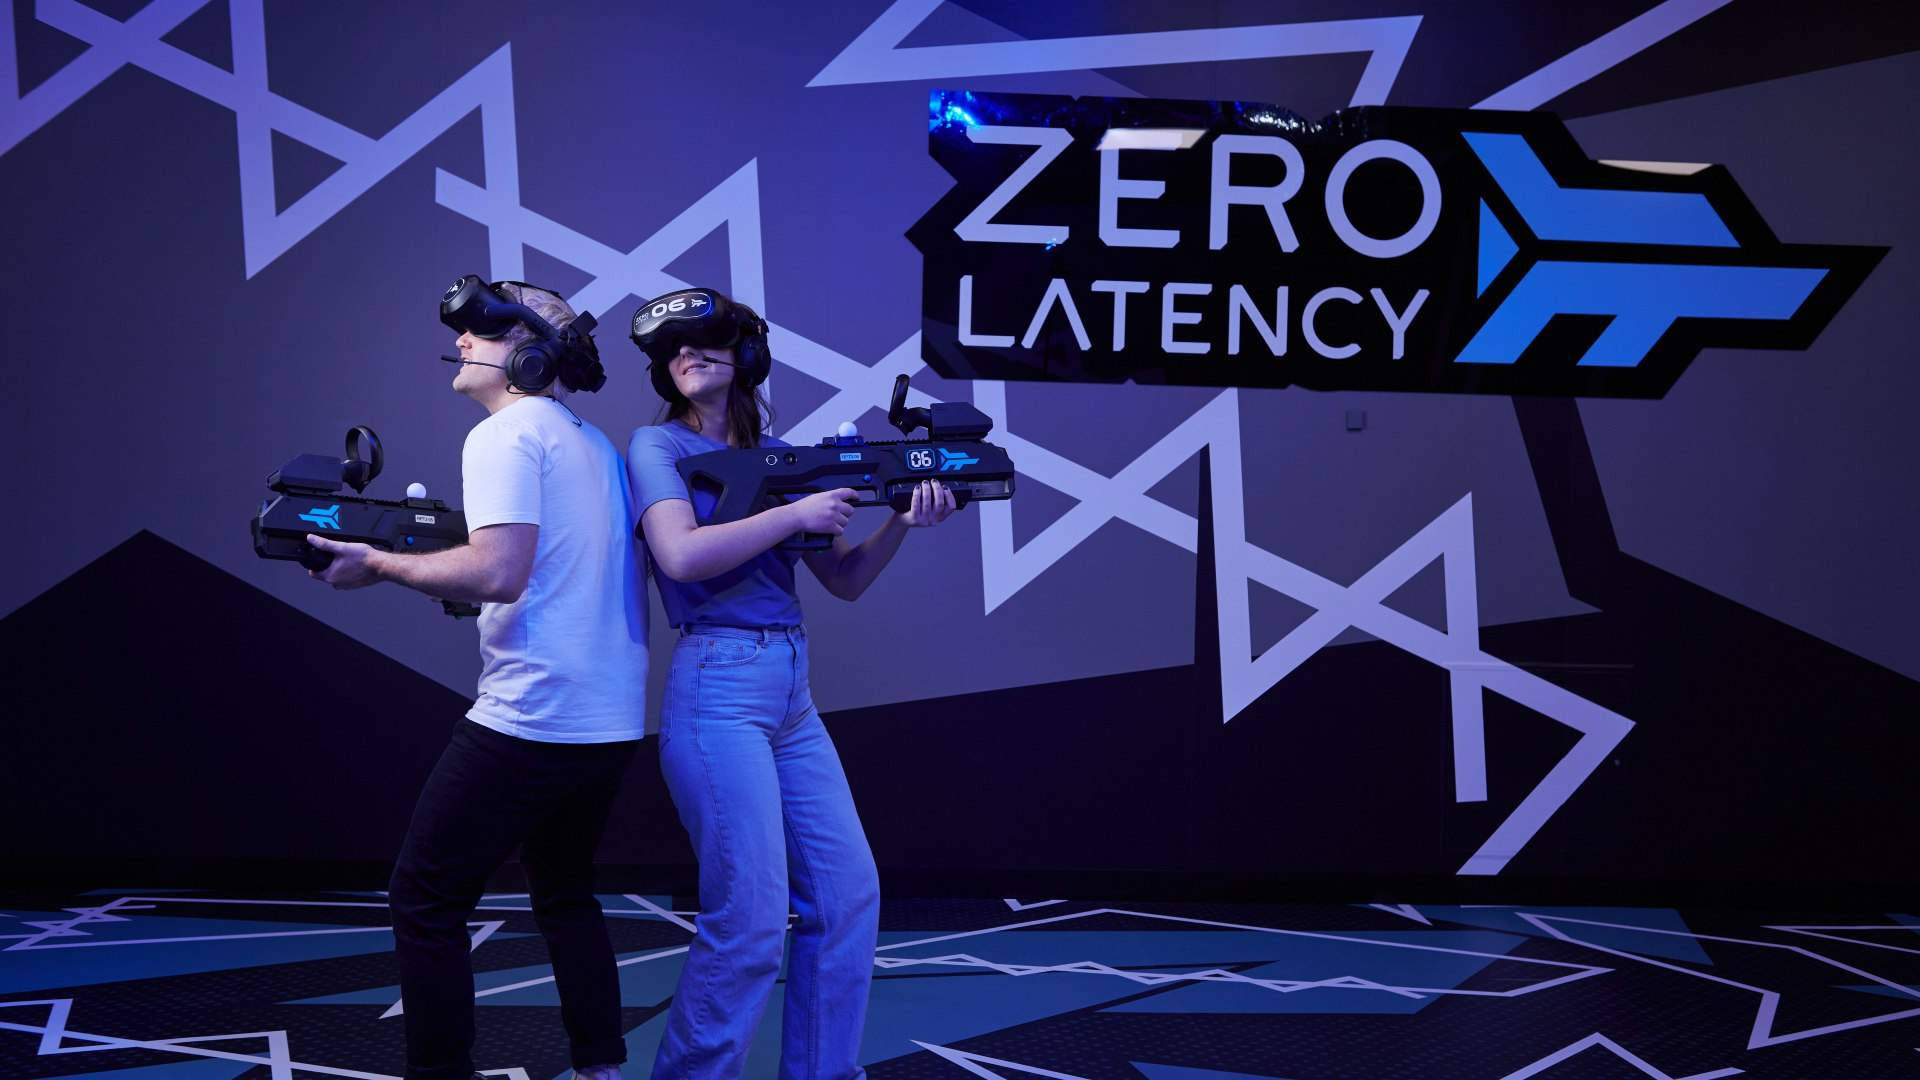 Couple Playing Laser Tag Wallpaper